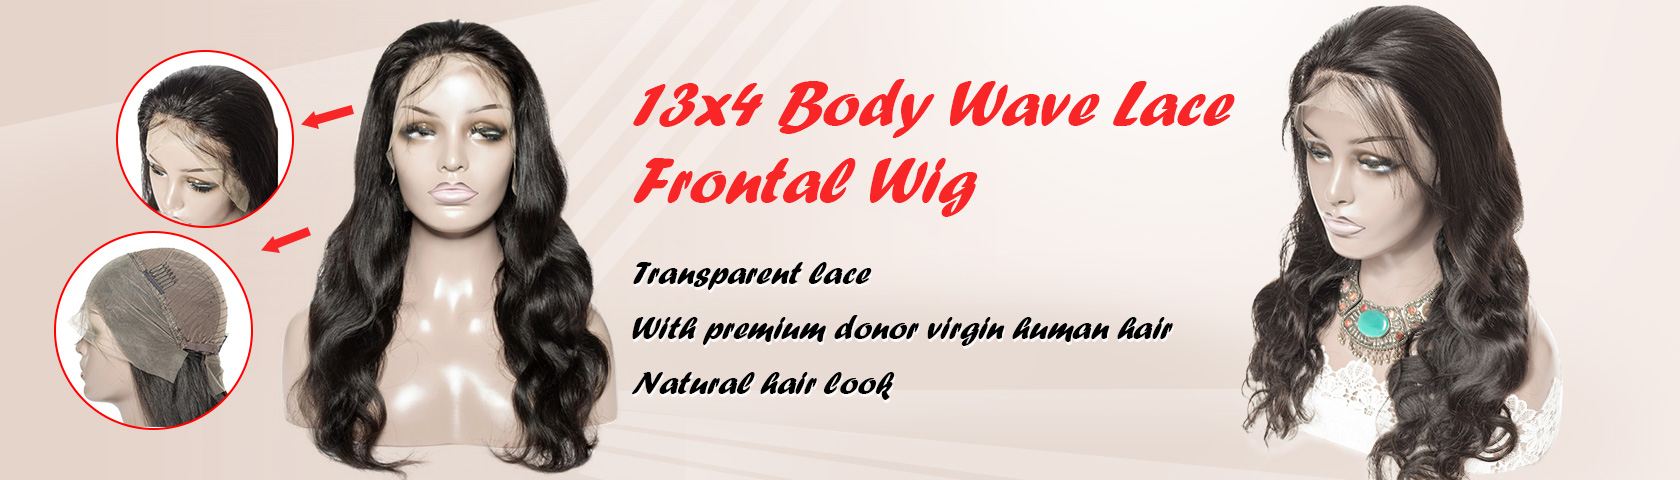 13x4 Body Wave Lace Frontal Wig